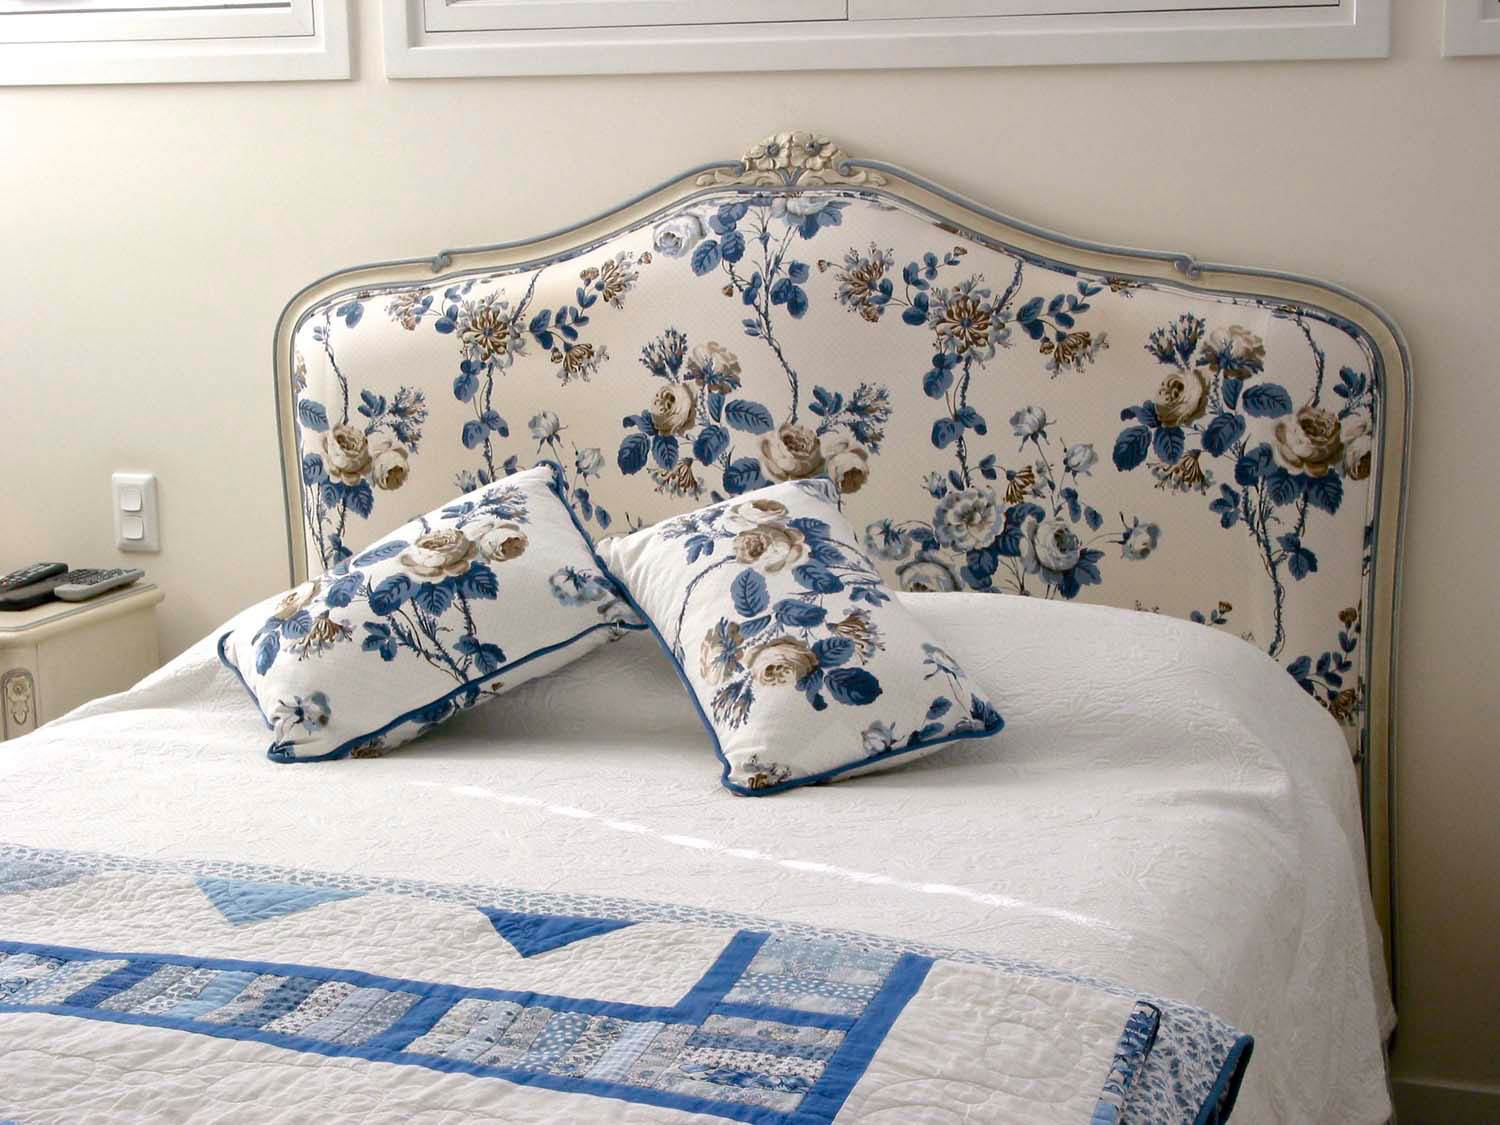 4 French bed head in painted finish with french floral fabric and pillows